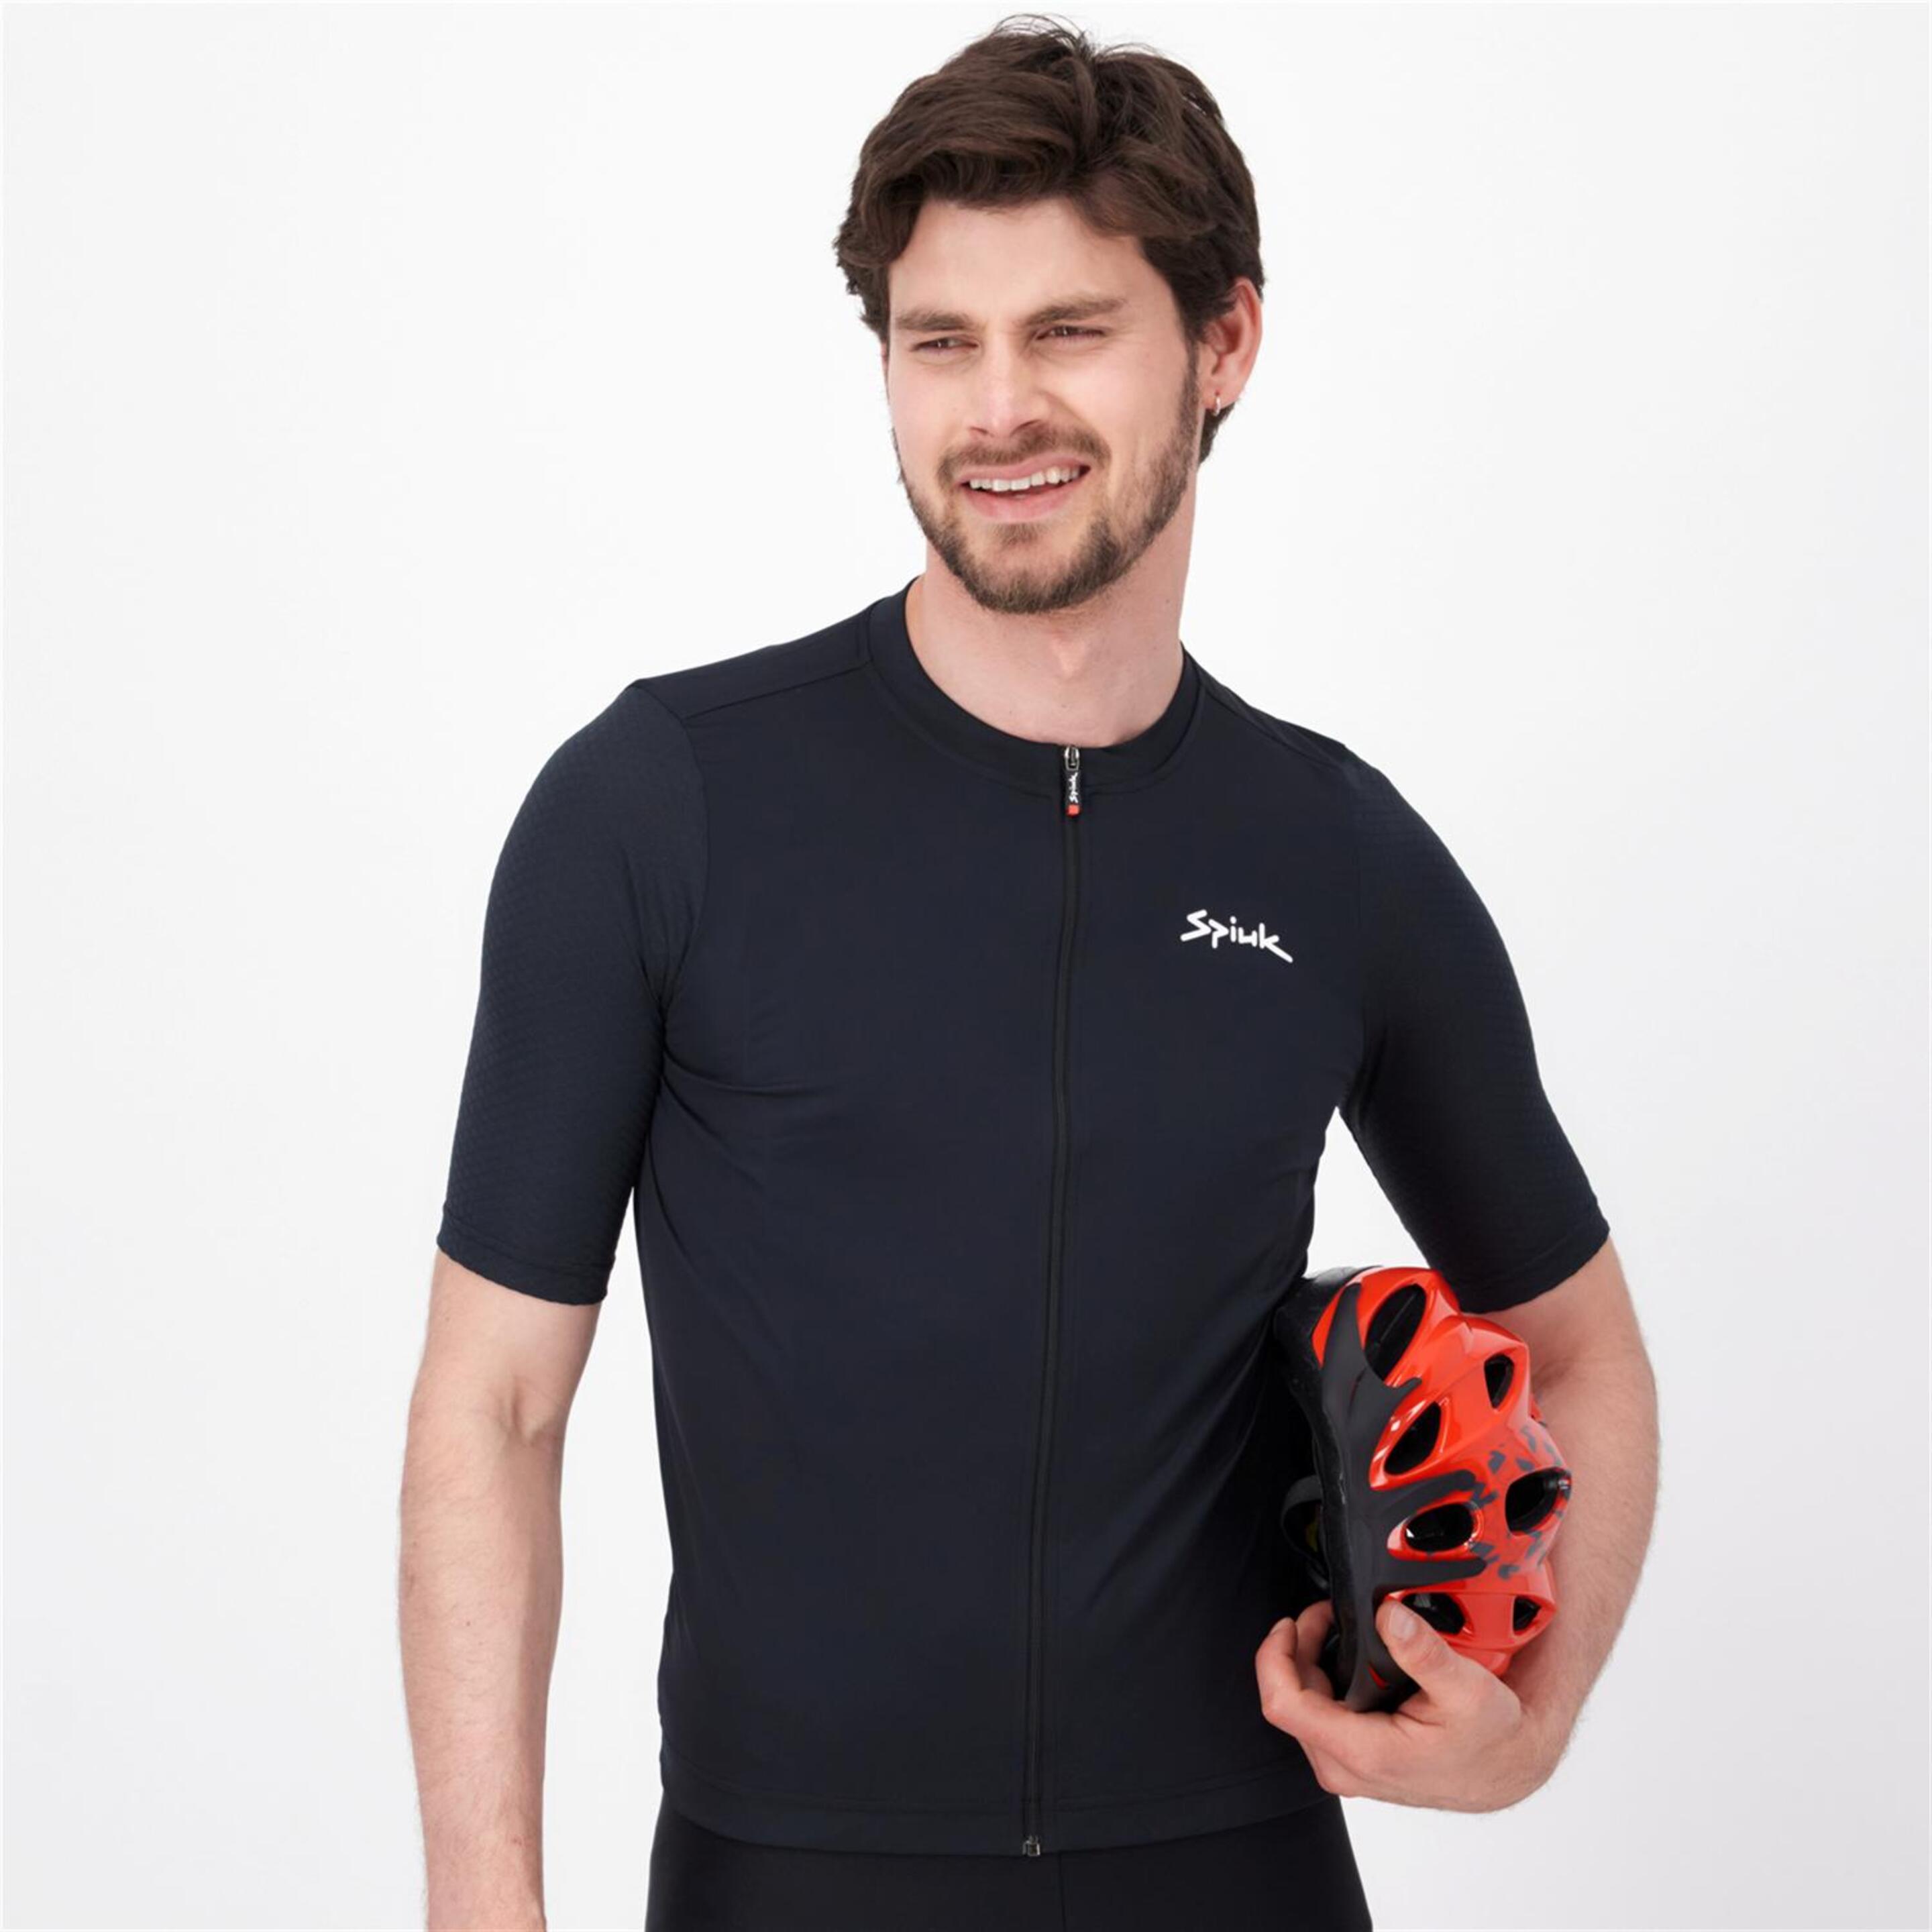 Spiuk Anatomic - negro - Maillot Ciclismo Hombre